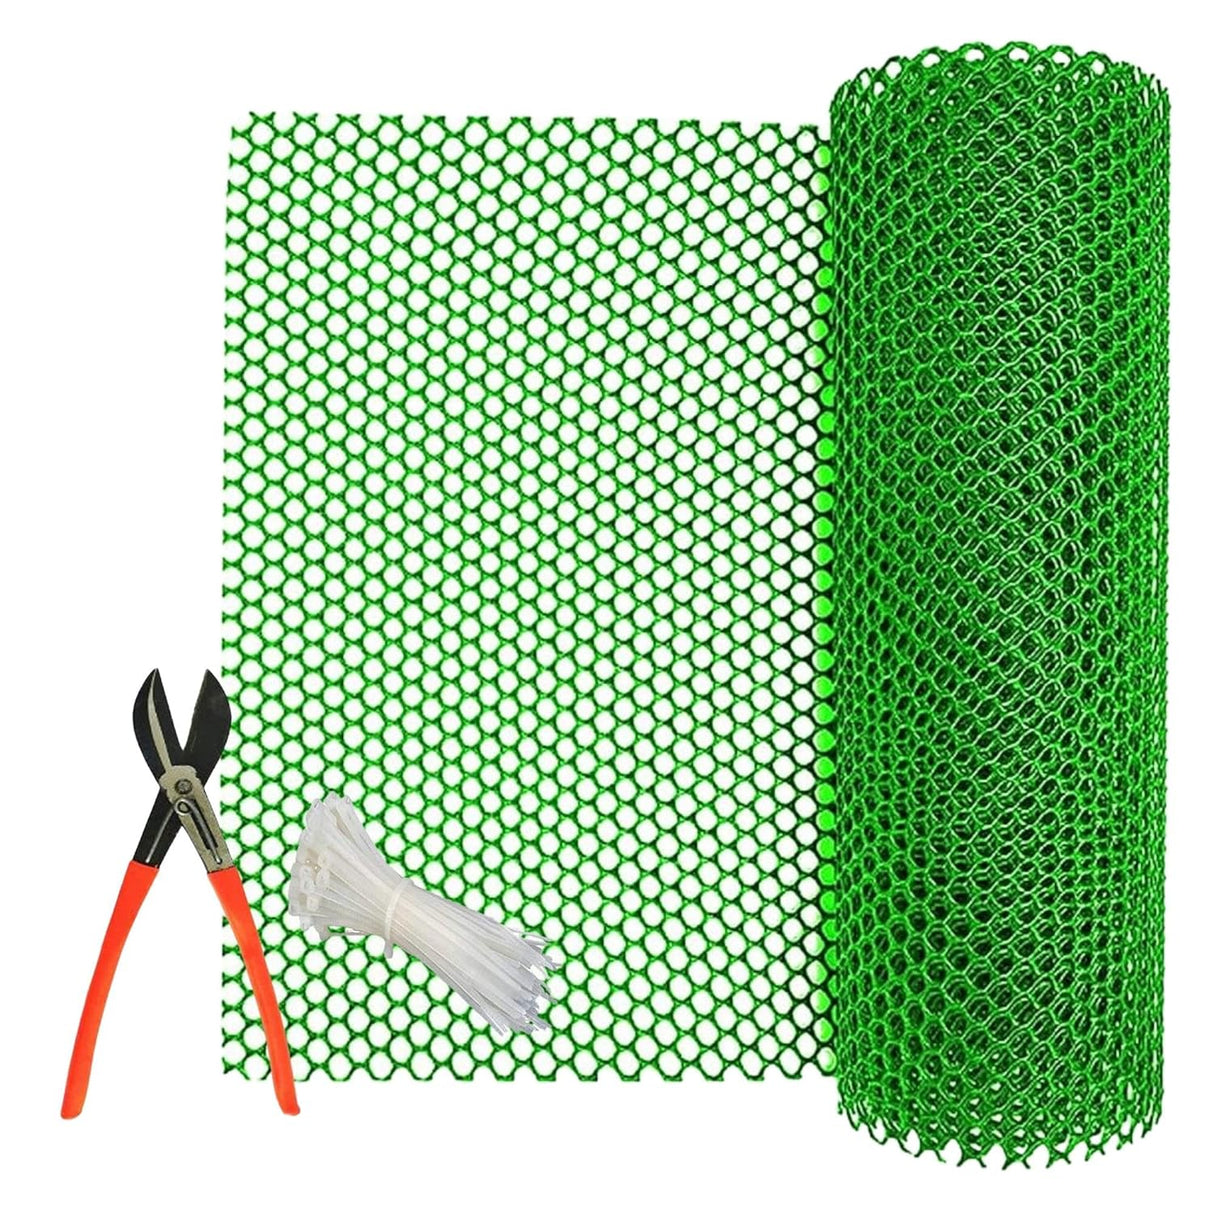 Tree Guard Net 4x20 Ft, Garden Fencing Net Virgin Plastic Green Color with 1 Cutter and 50 PVC Tag - Singhal Mart